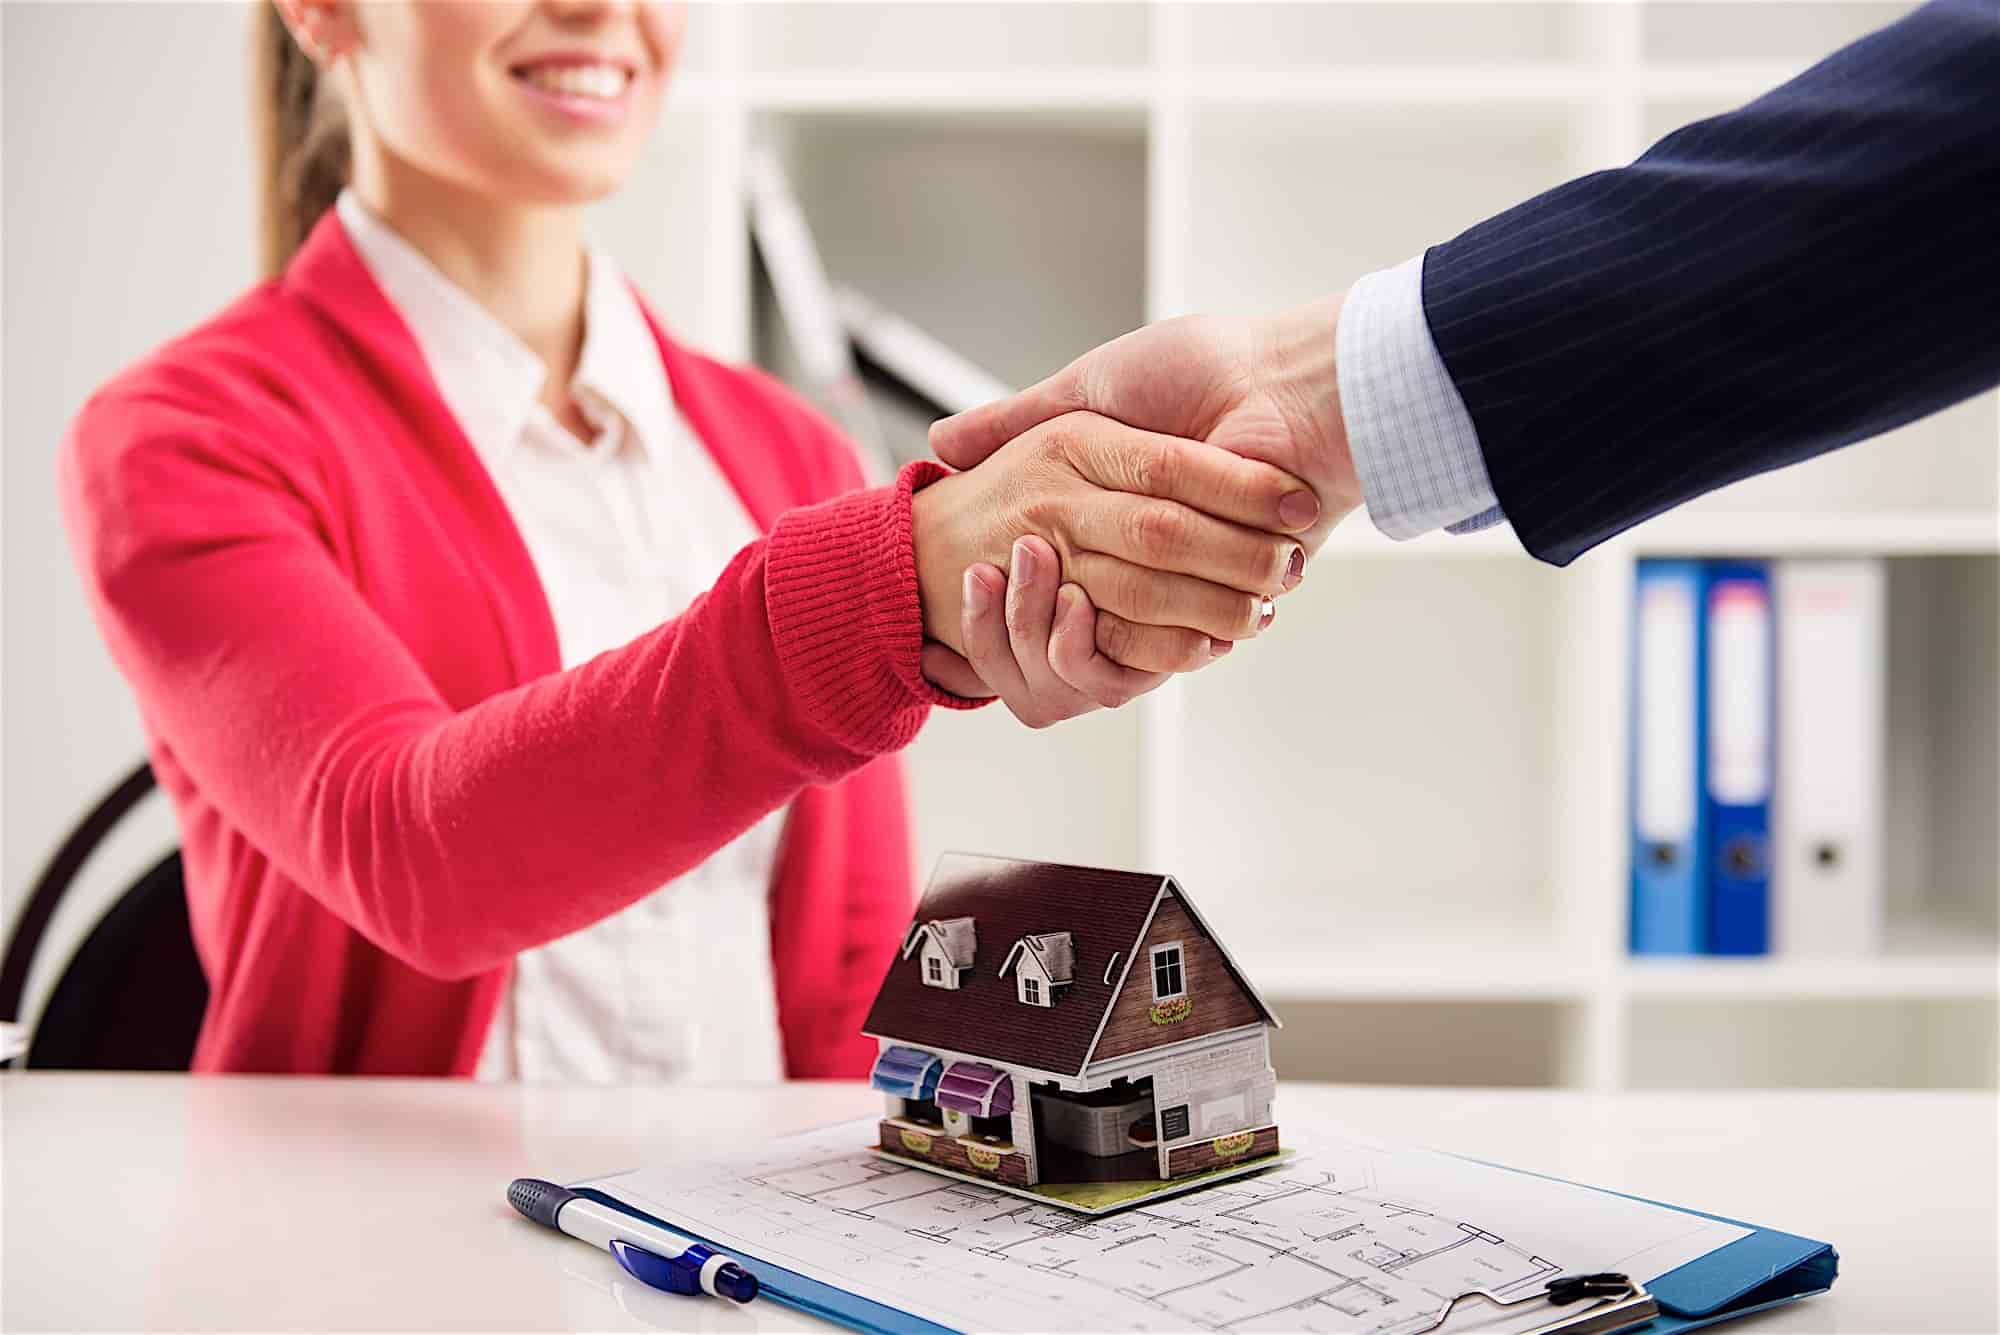 What Makes a Good Real Estate Agent